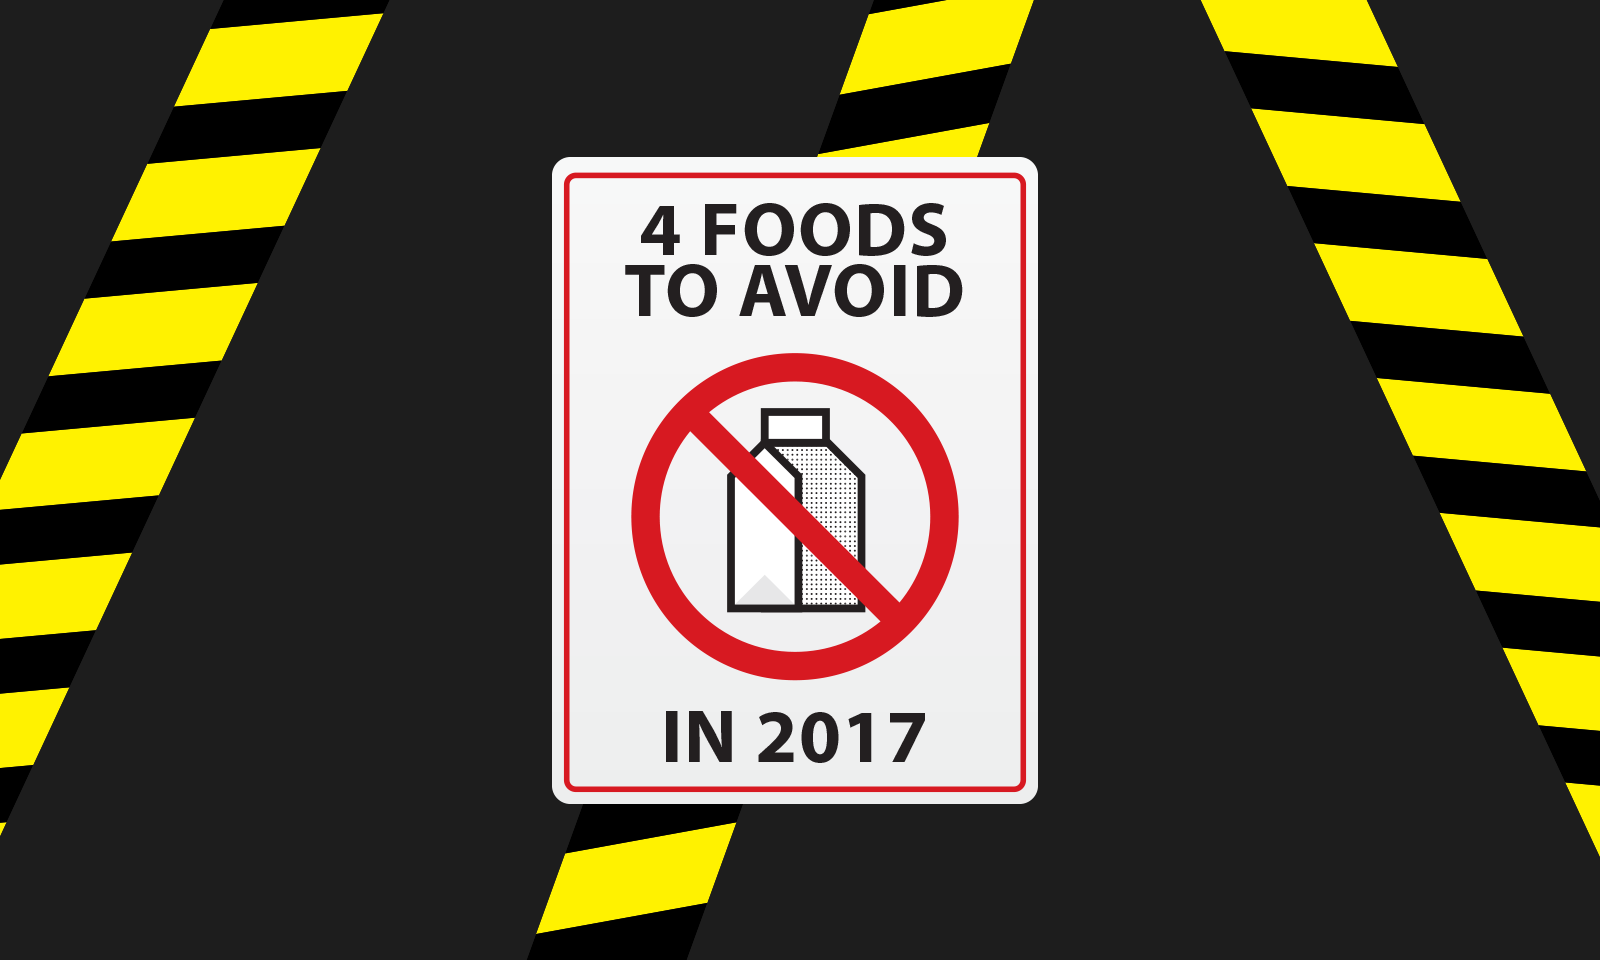 foods to avoid